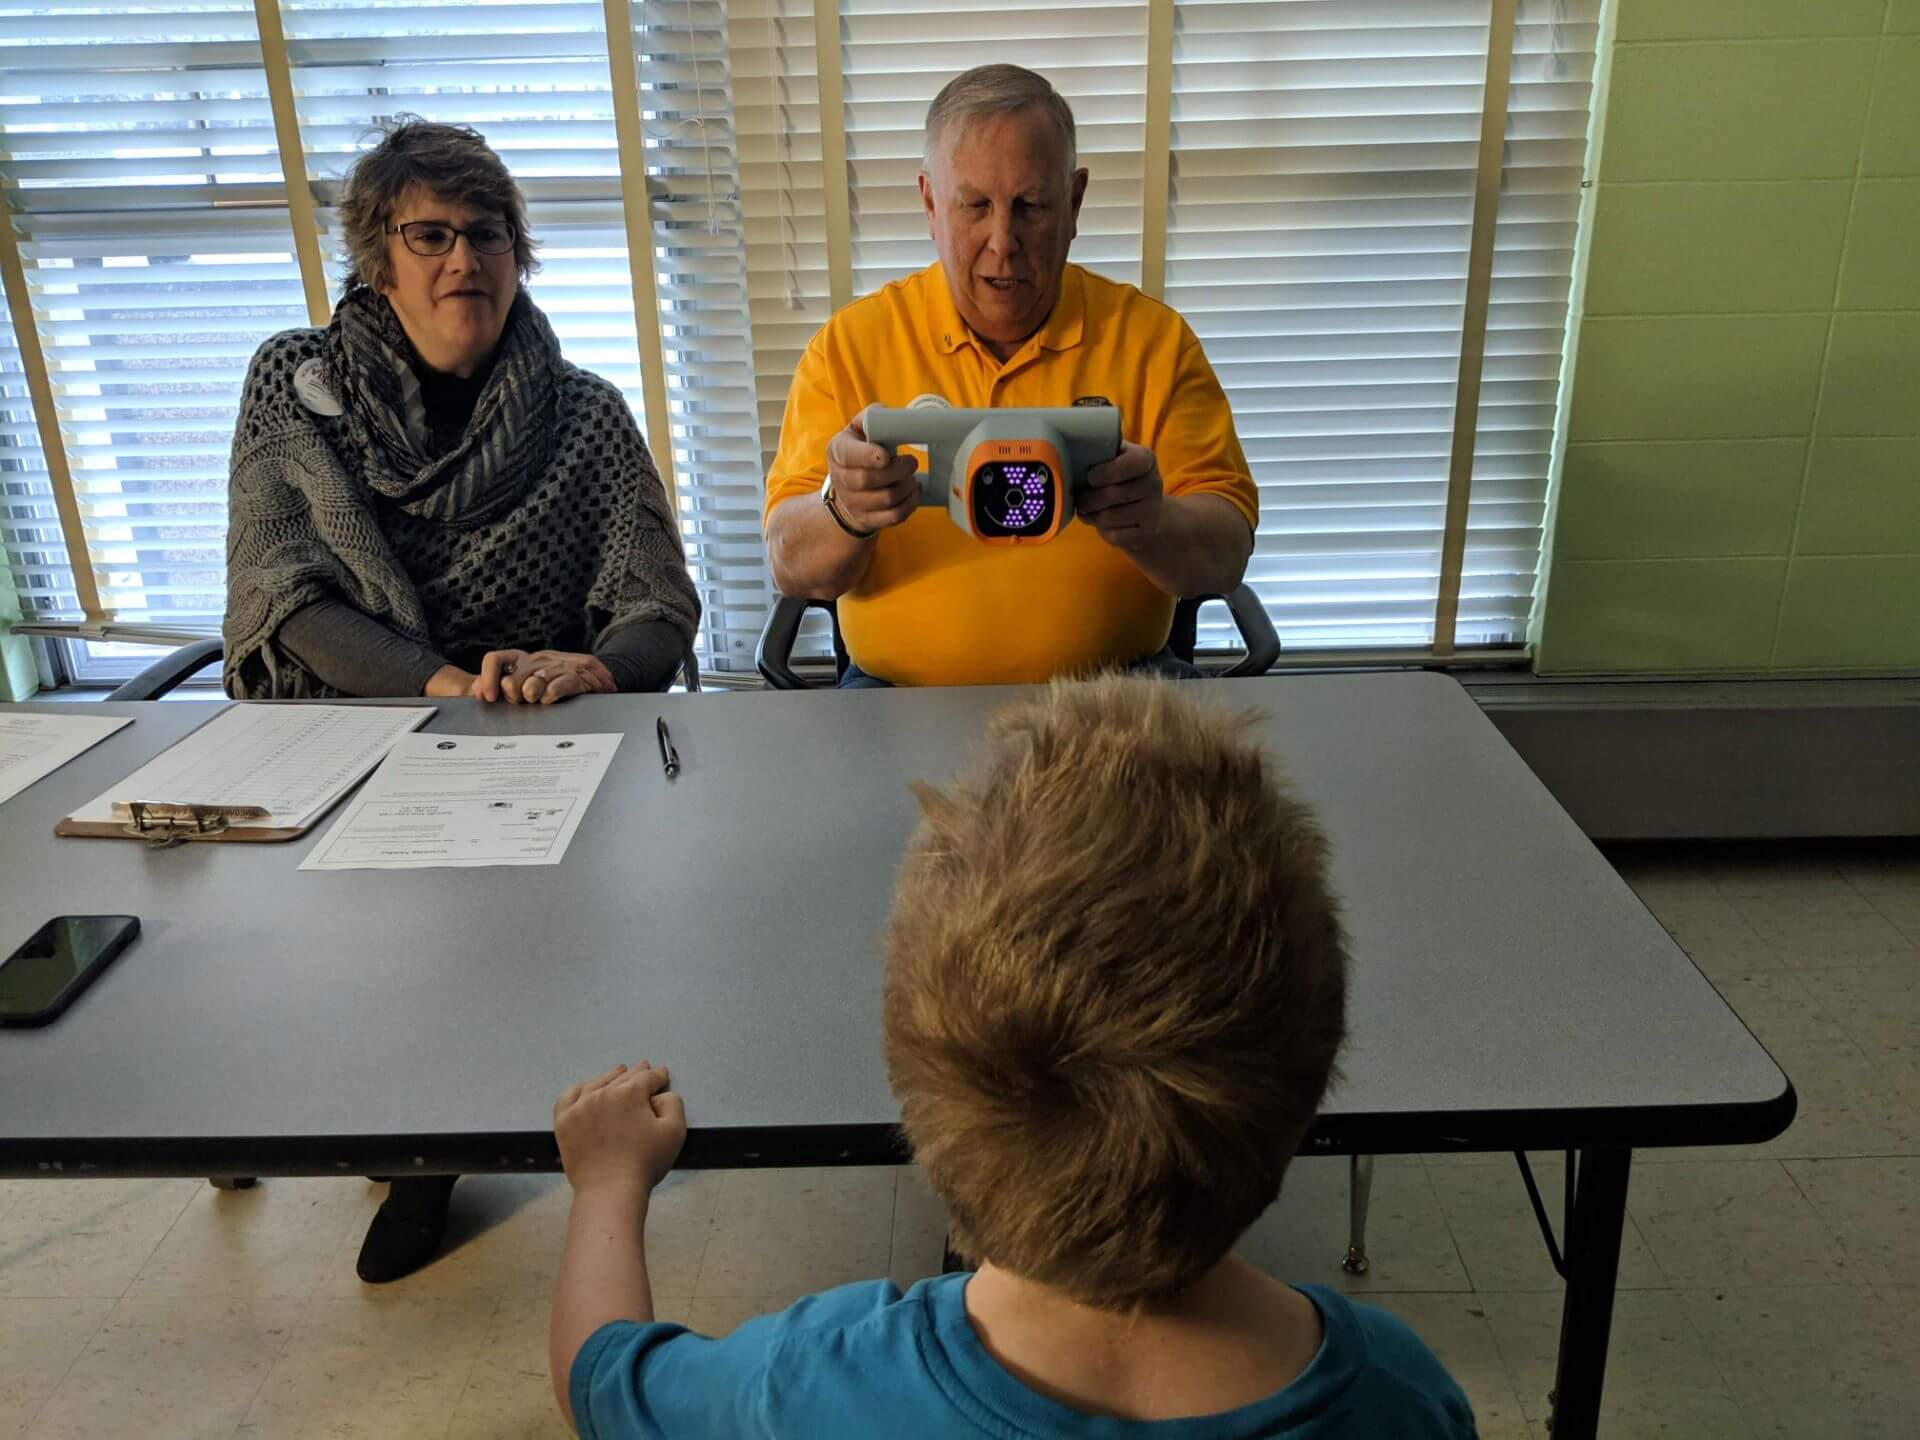 Lions conduct vision screening test on a kindergartener